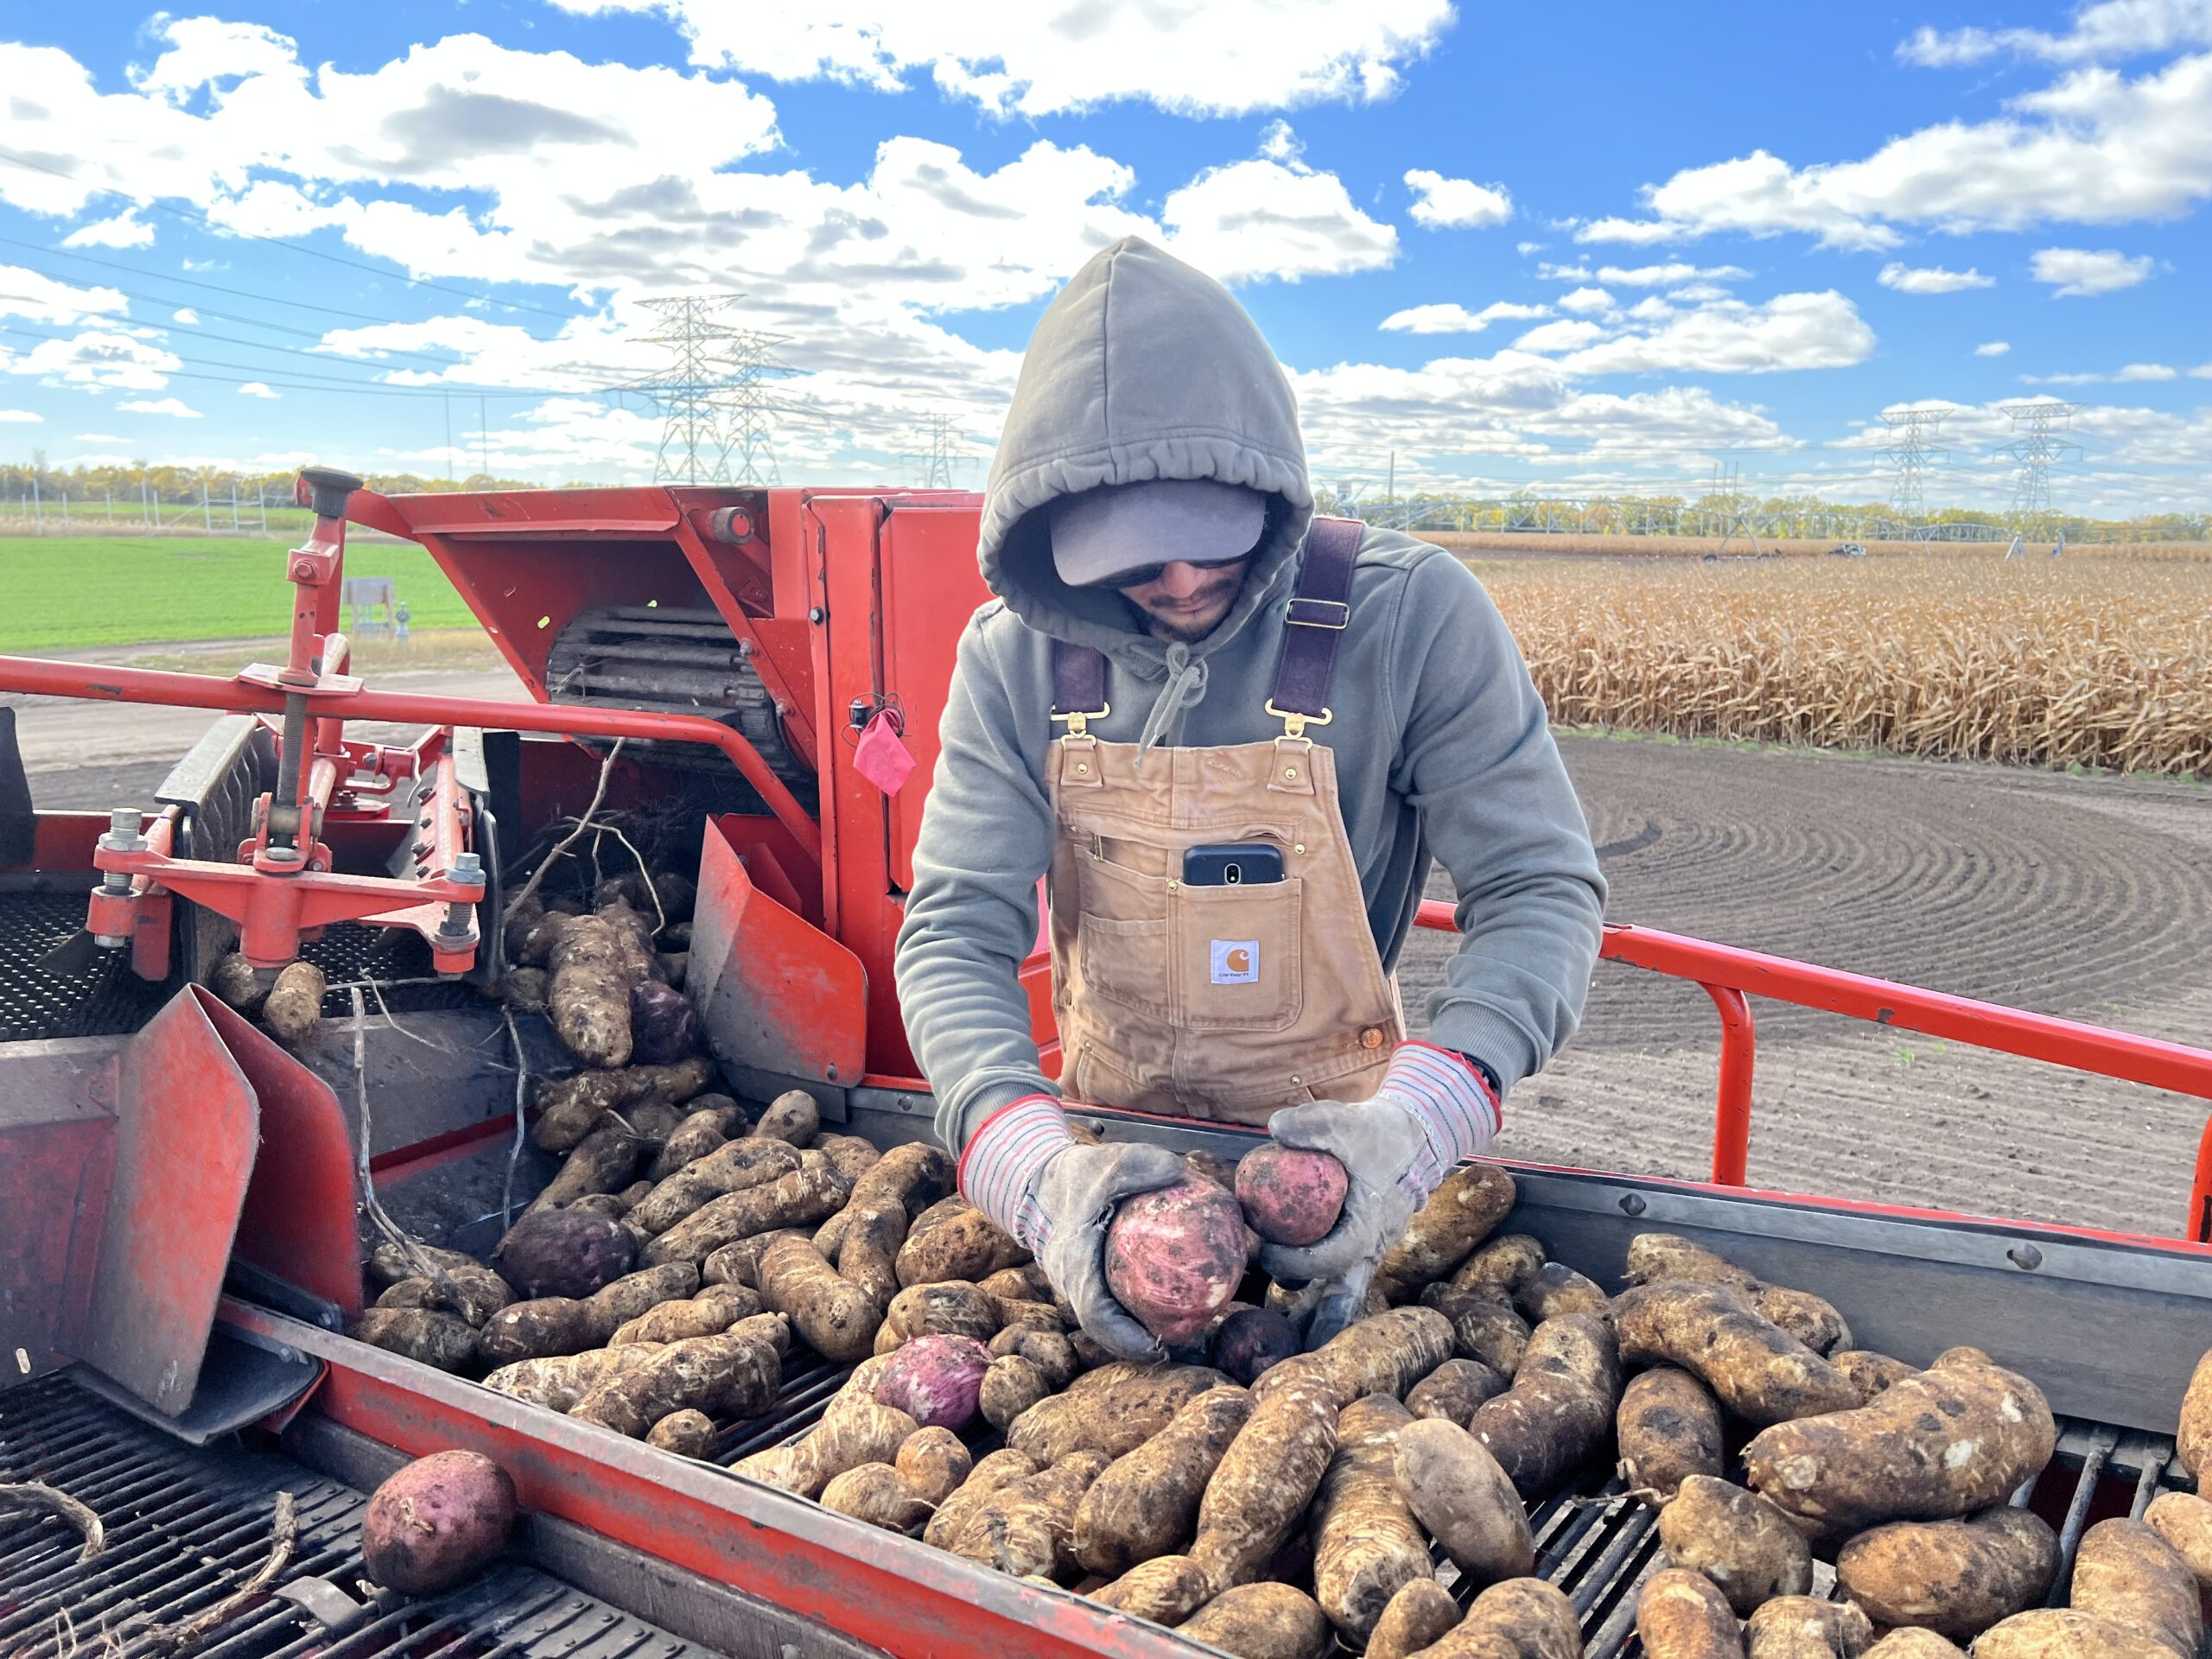 Potato nutrient management research: 5 things we’ve learned